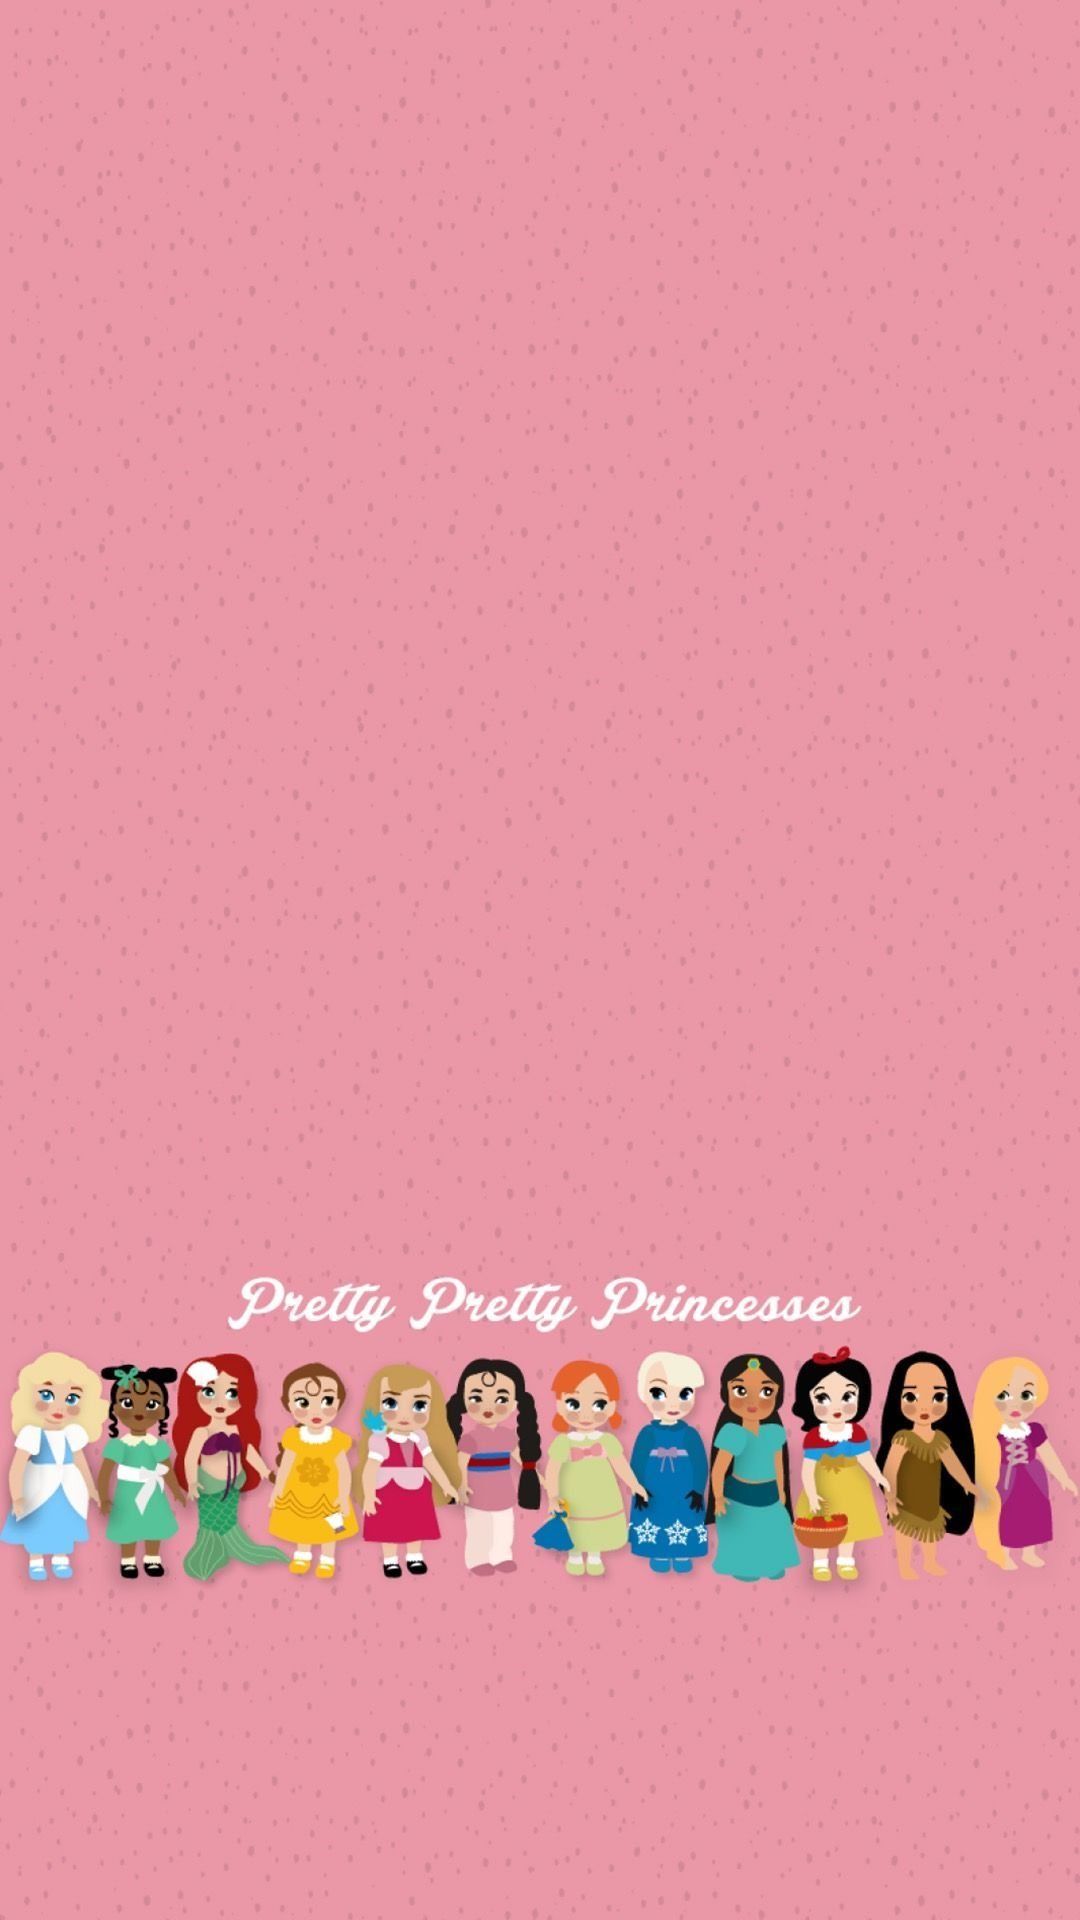 Disney Princesses iPhone Wallpaper with high-resolution 1080x1920 pixel. You can use this wallpaper for your iPhone 5, 6, 7, 8, X, XS, XR backgrounds, Mobile Screensaver, or iPad Lock Screen - Disney